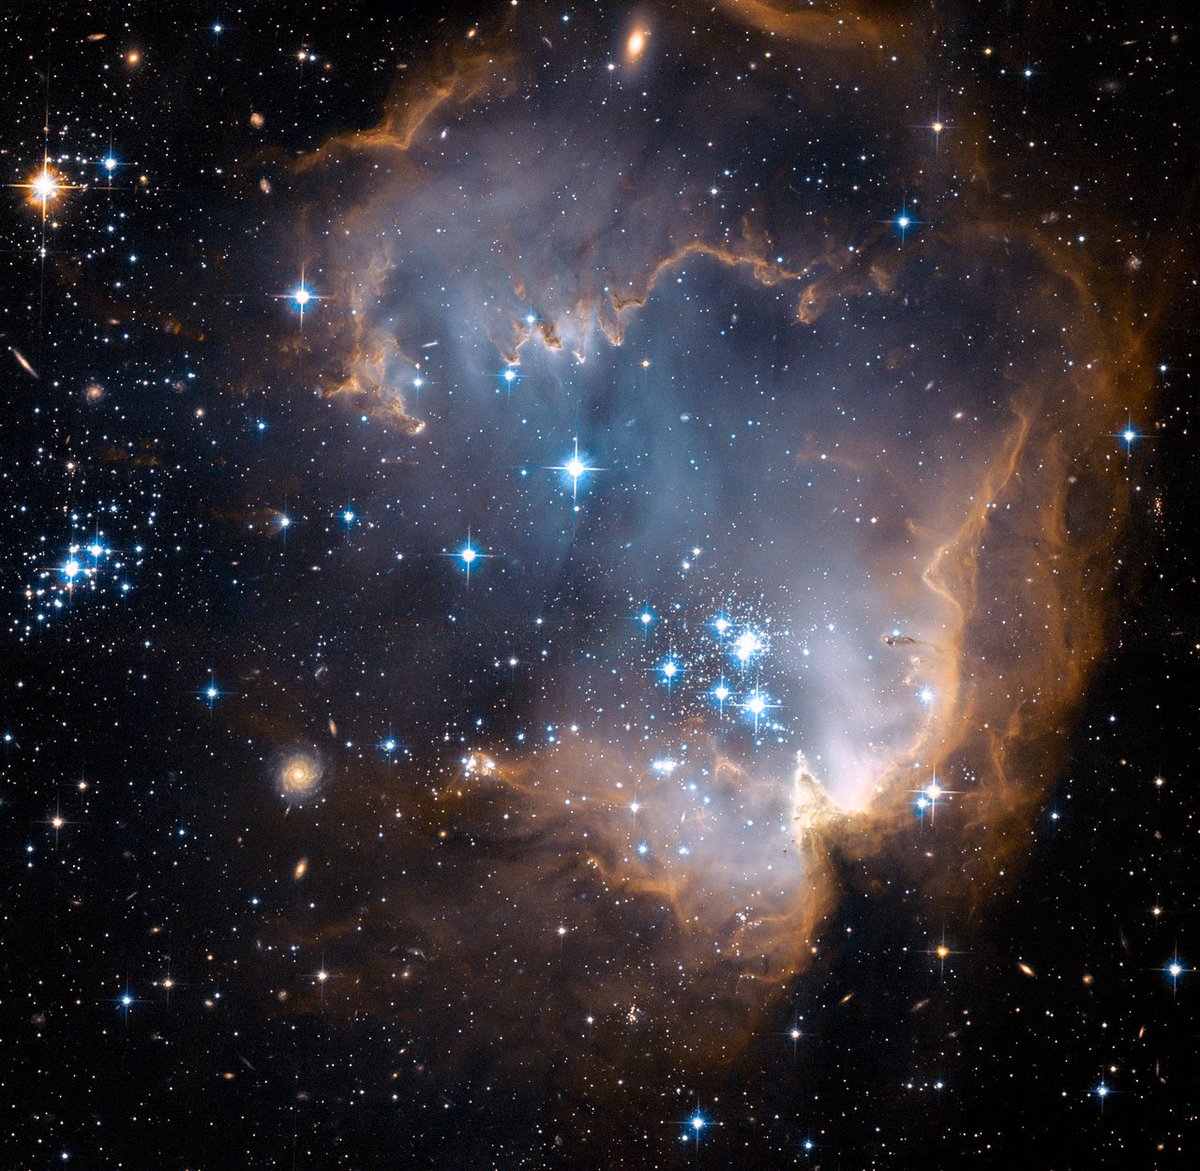 The nebula NGC 602 in the Small Magellanic Cloud.Image: NASA, ESA and the Hubble Heritage Team (STScI/AURA)-ESA/Hubble Collaboration